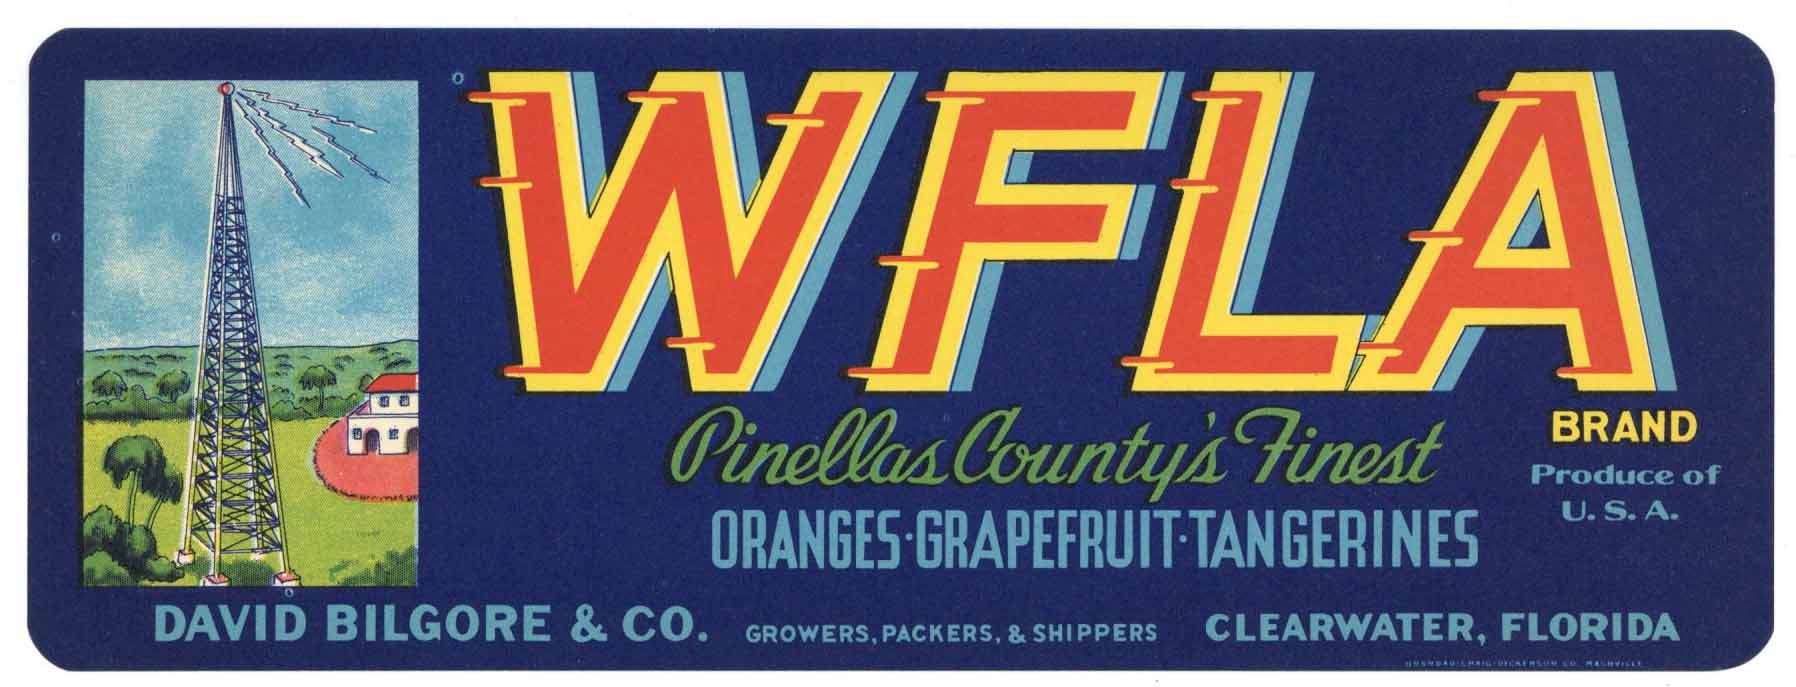 WFLA Brand Vintage Clearwater Florida Citrus Crate Label